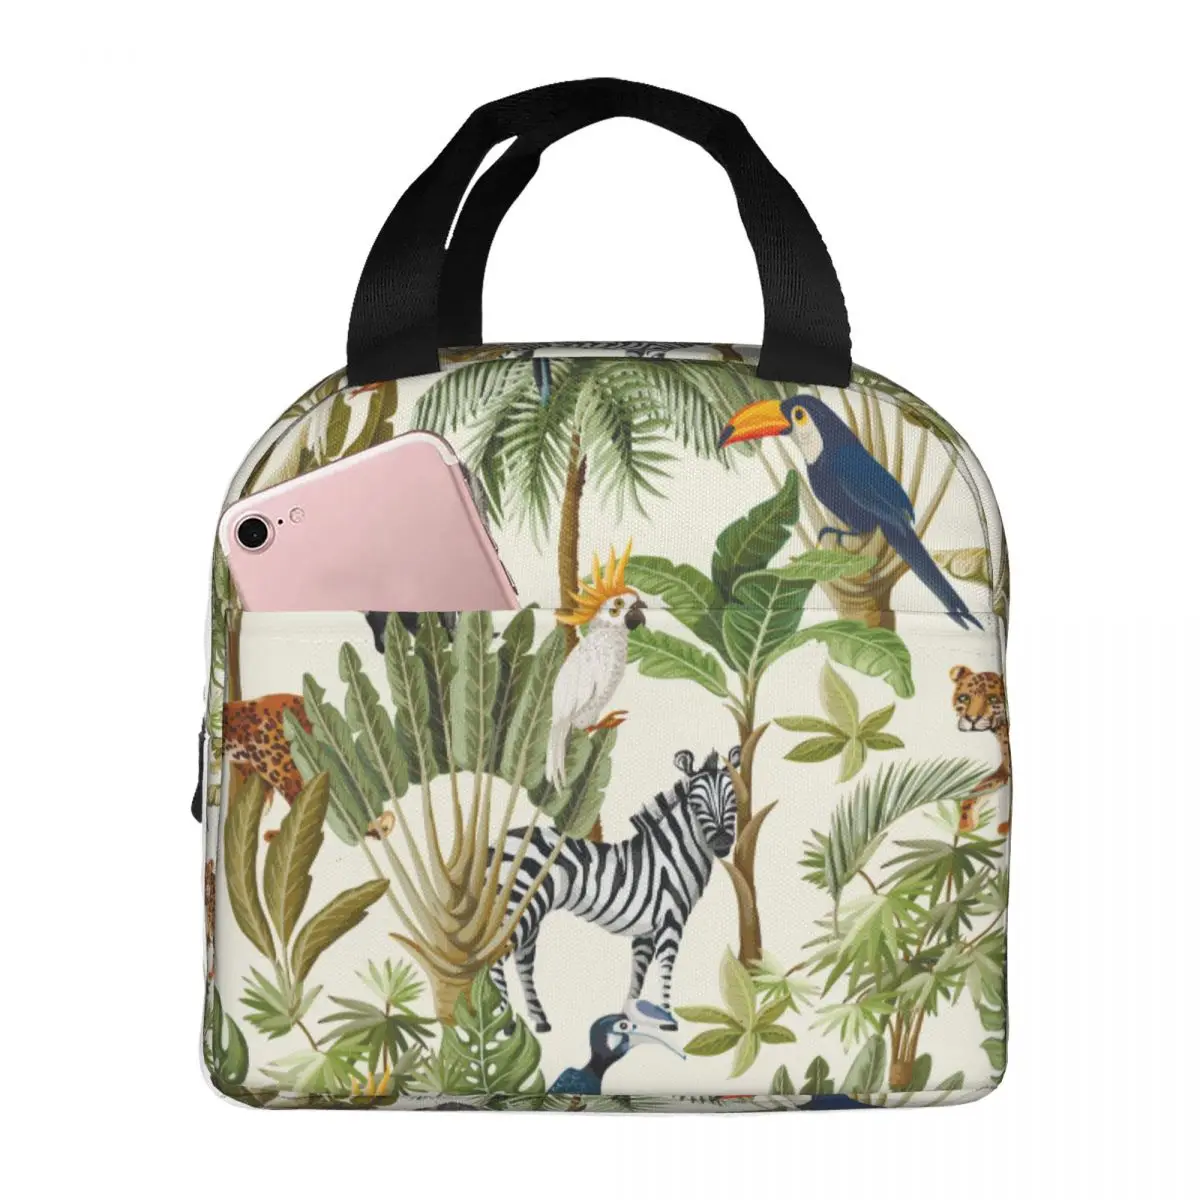 Exotic Trees African Animals Lunch Bags Portable Insulated Oxford Cooler Tropical Zebra Thermal Picnic Tote for Women Girl